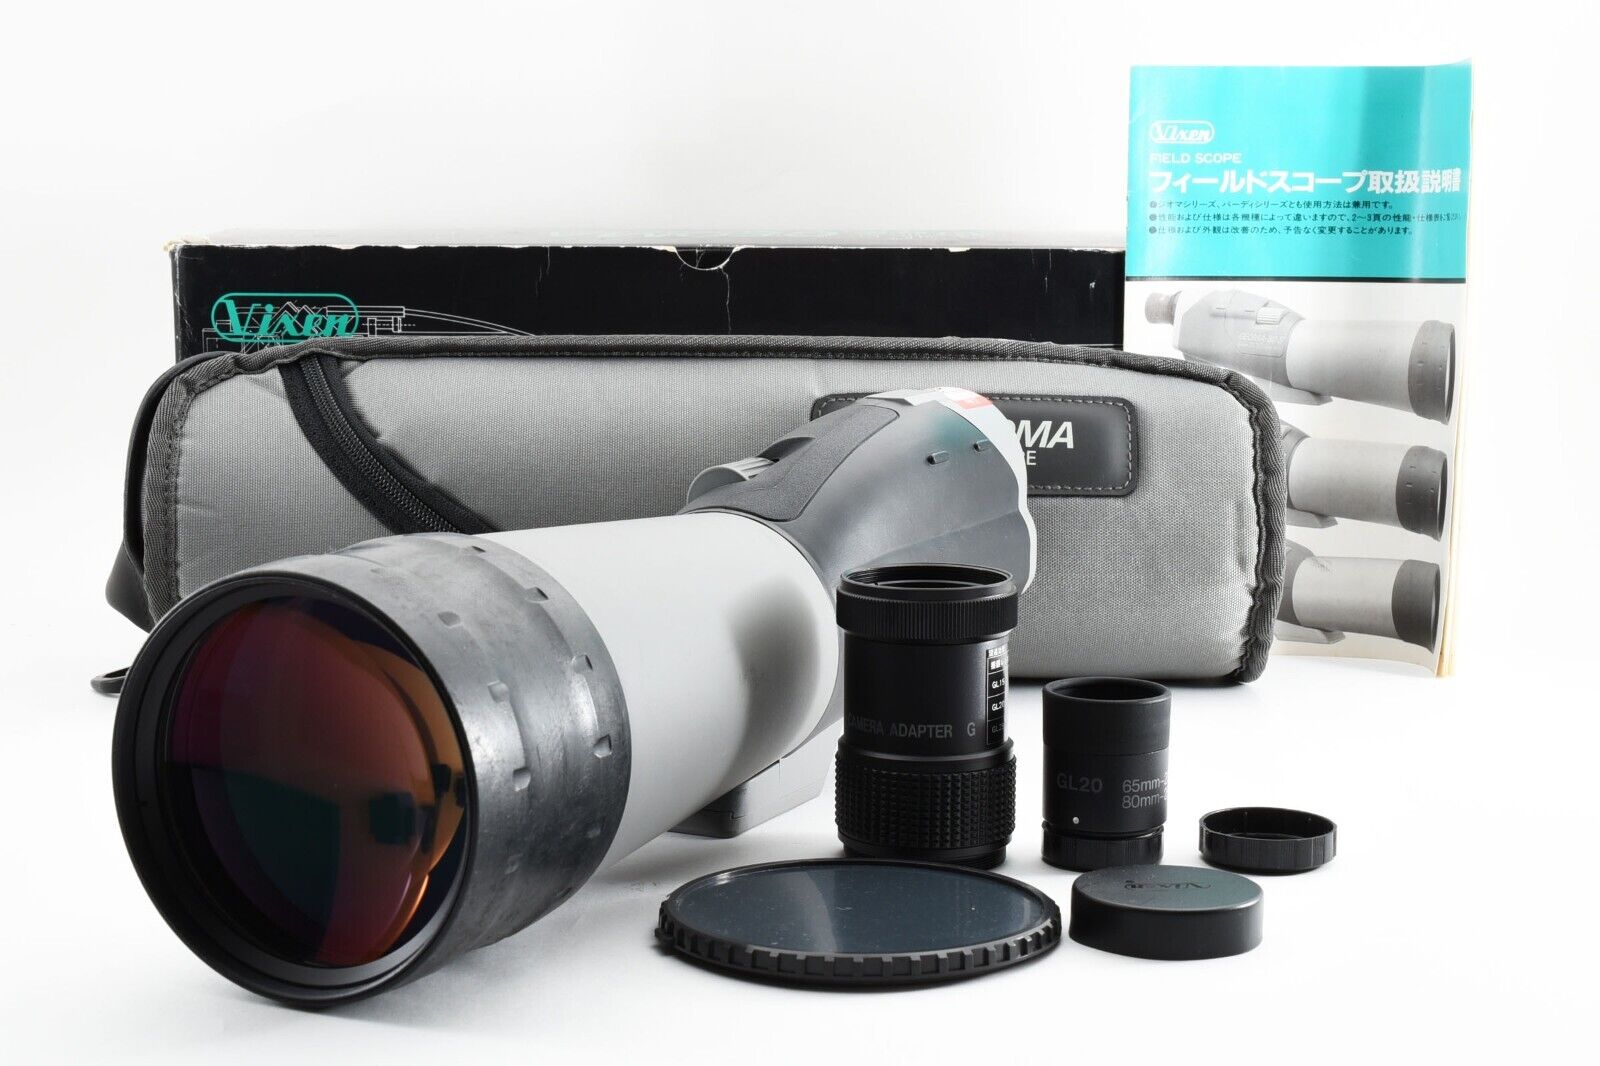 Vixen Geoma ED 80-S Spotting Scope W/ Adapter G & GL20 [Excellent++] From Japan